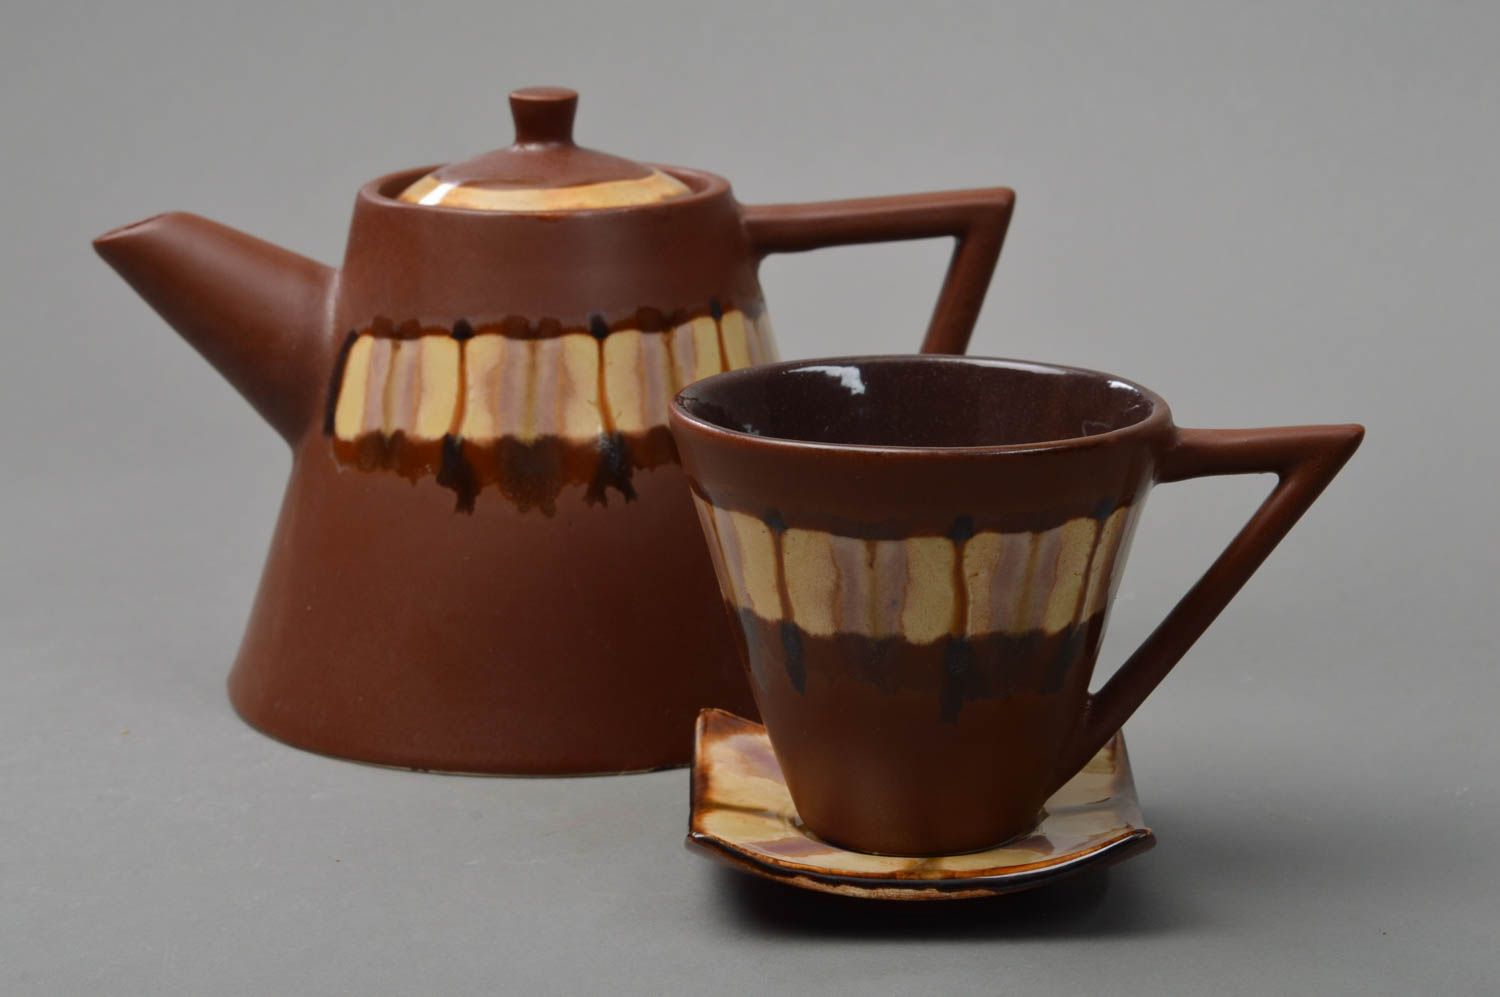 Art handmade pottery set of pyramid shape kettle and teacup in brown and beige color photo 3